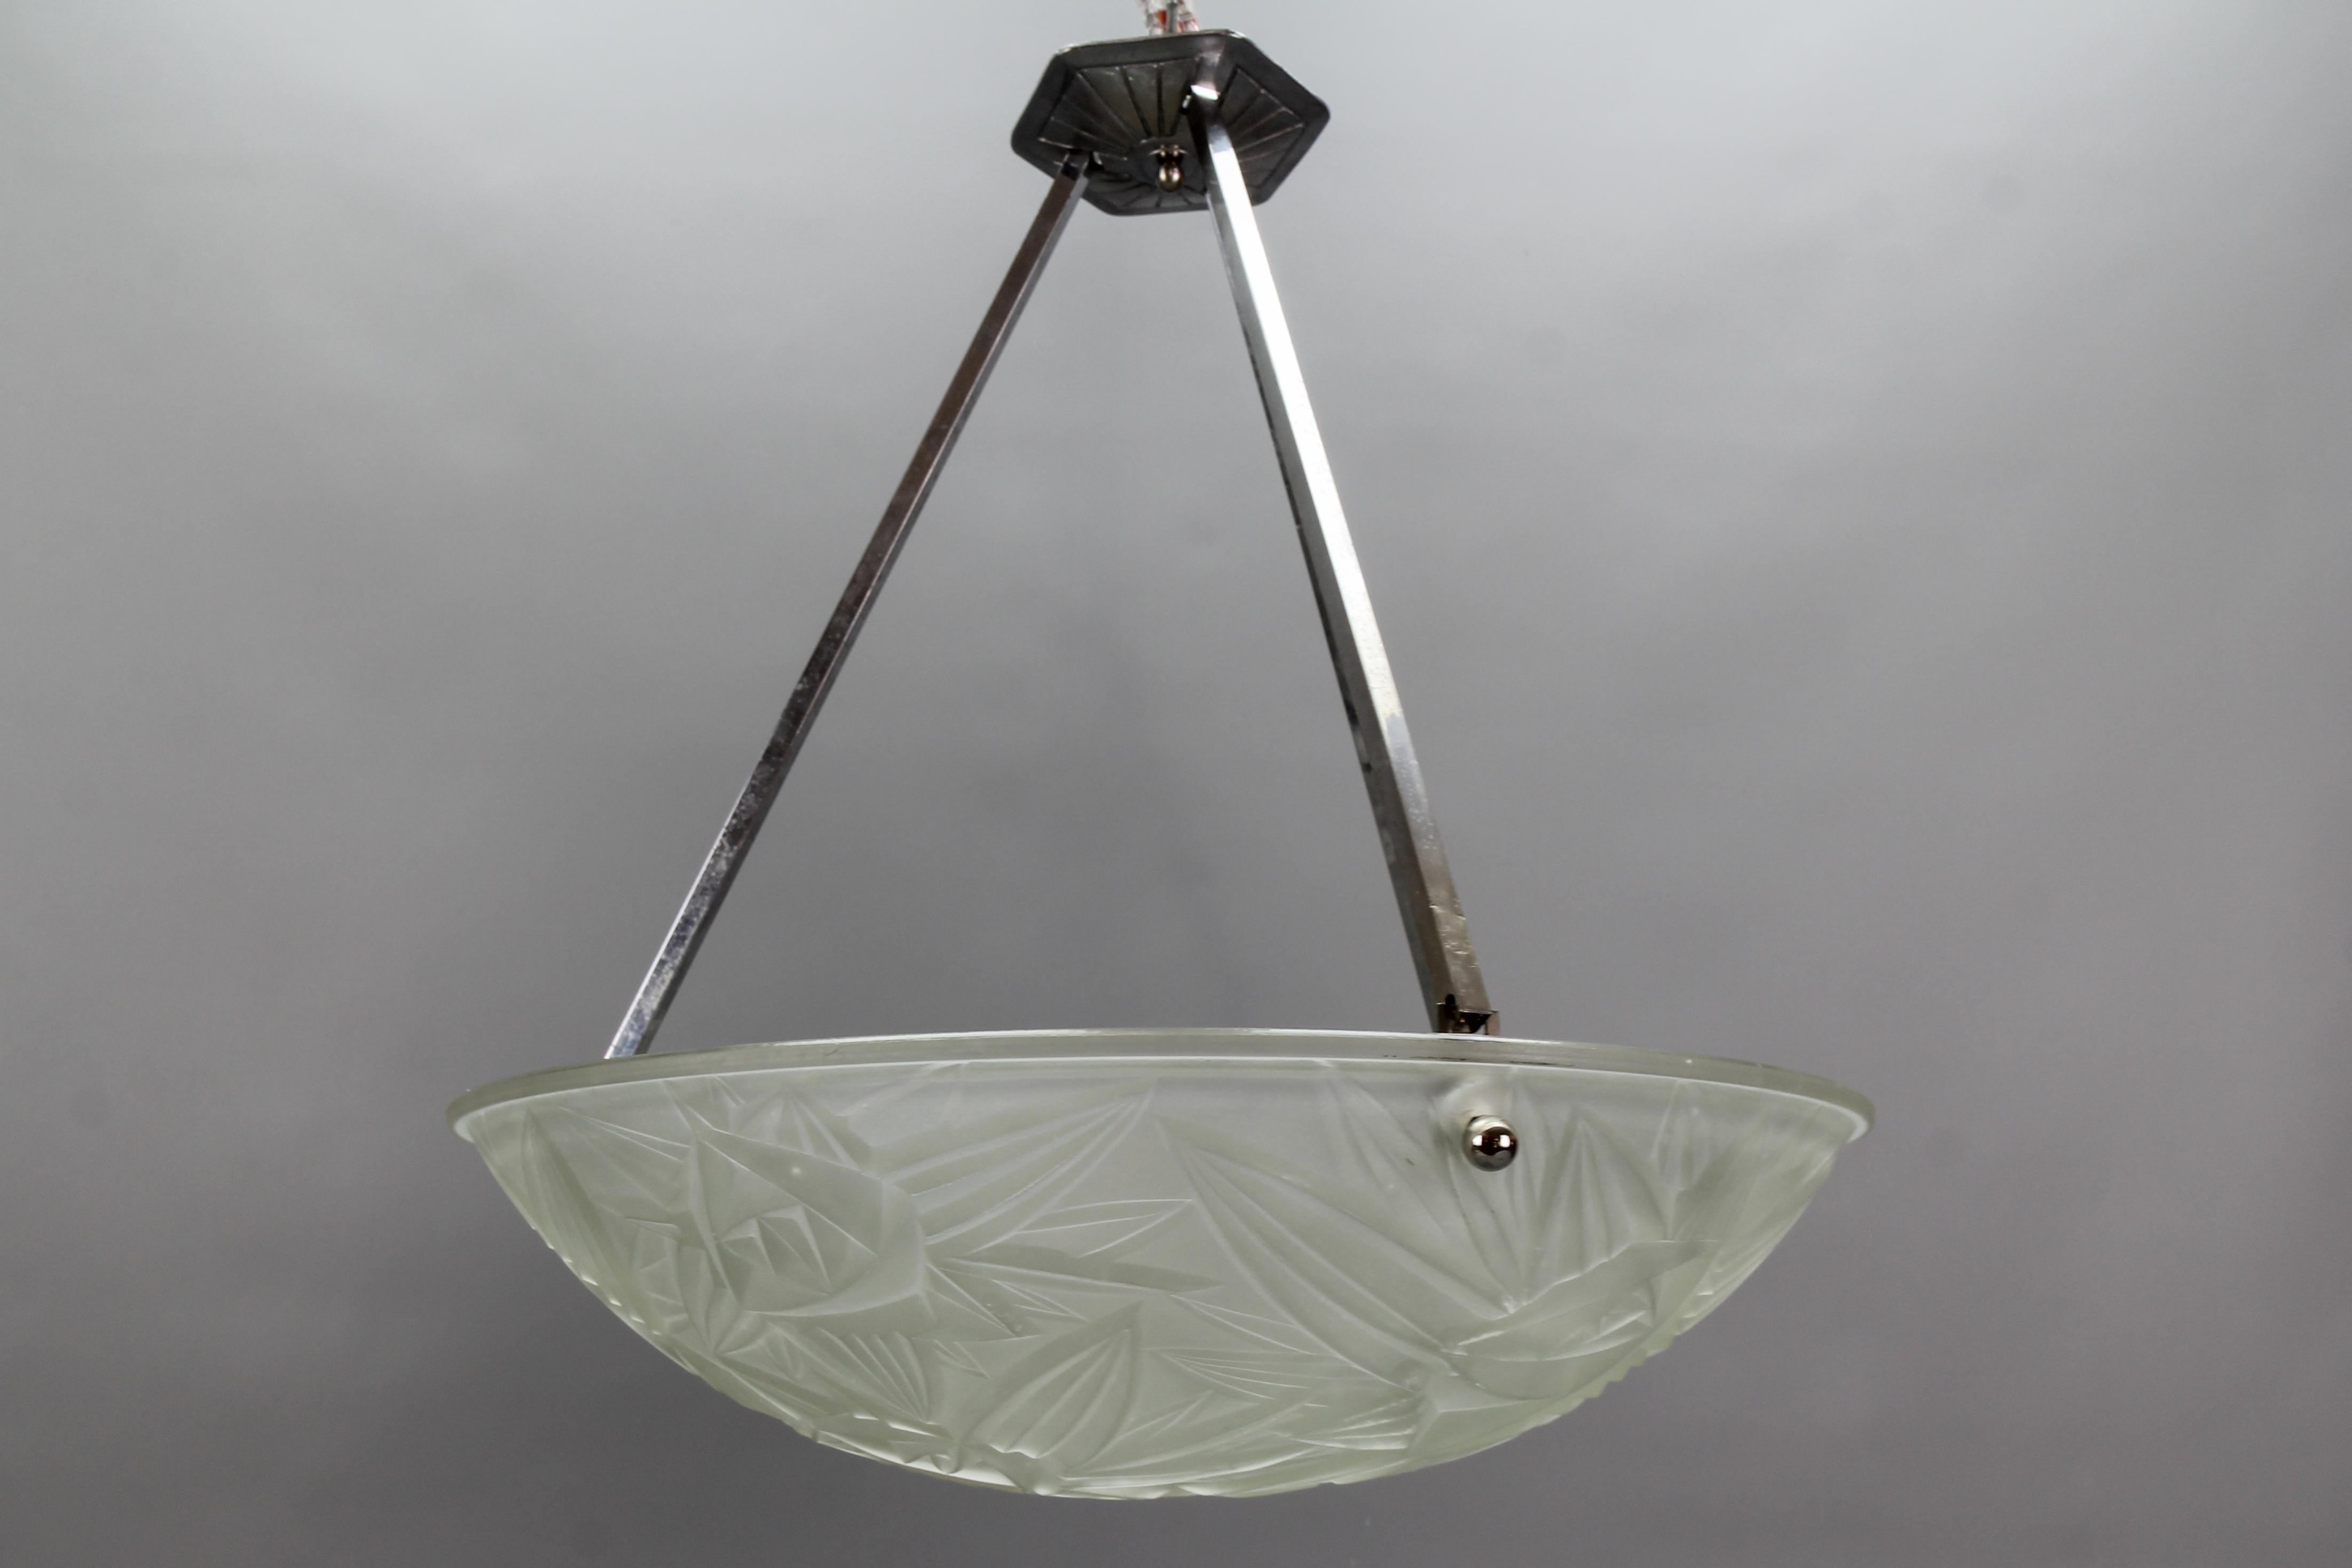 French Art Deco Chromed Brass and Frosted Glass Pendant Light by Noverdy, 1930s For Sale 4